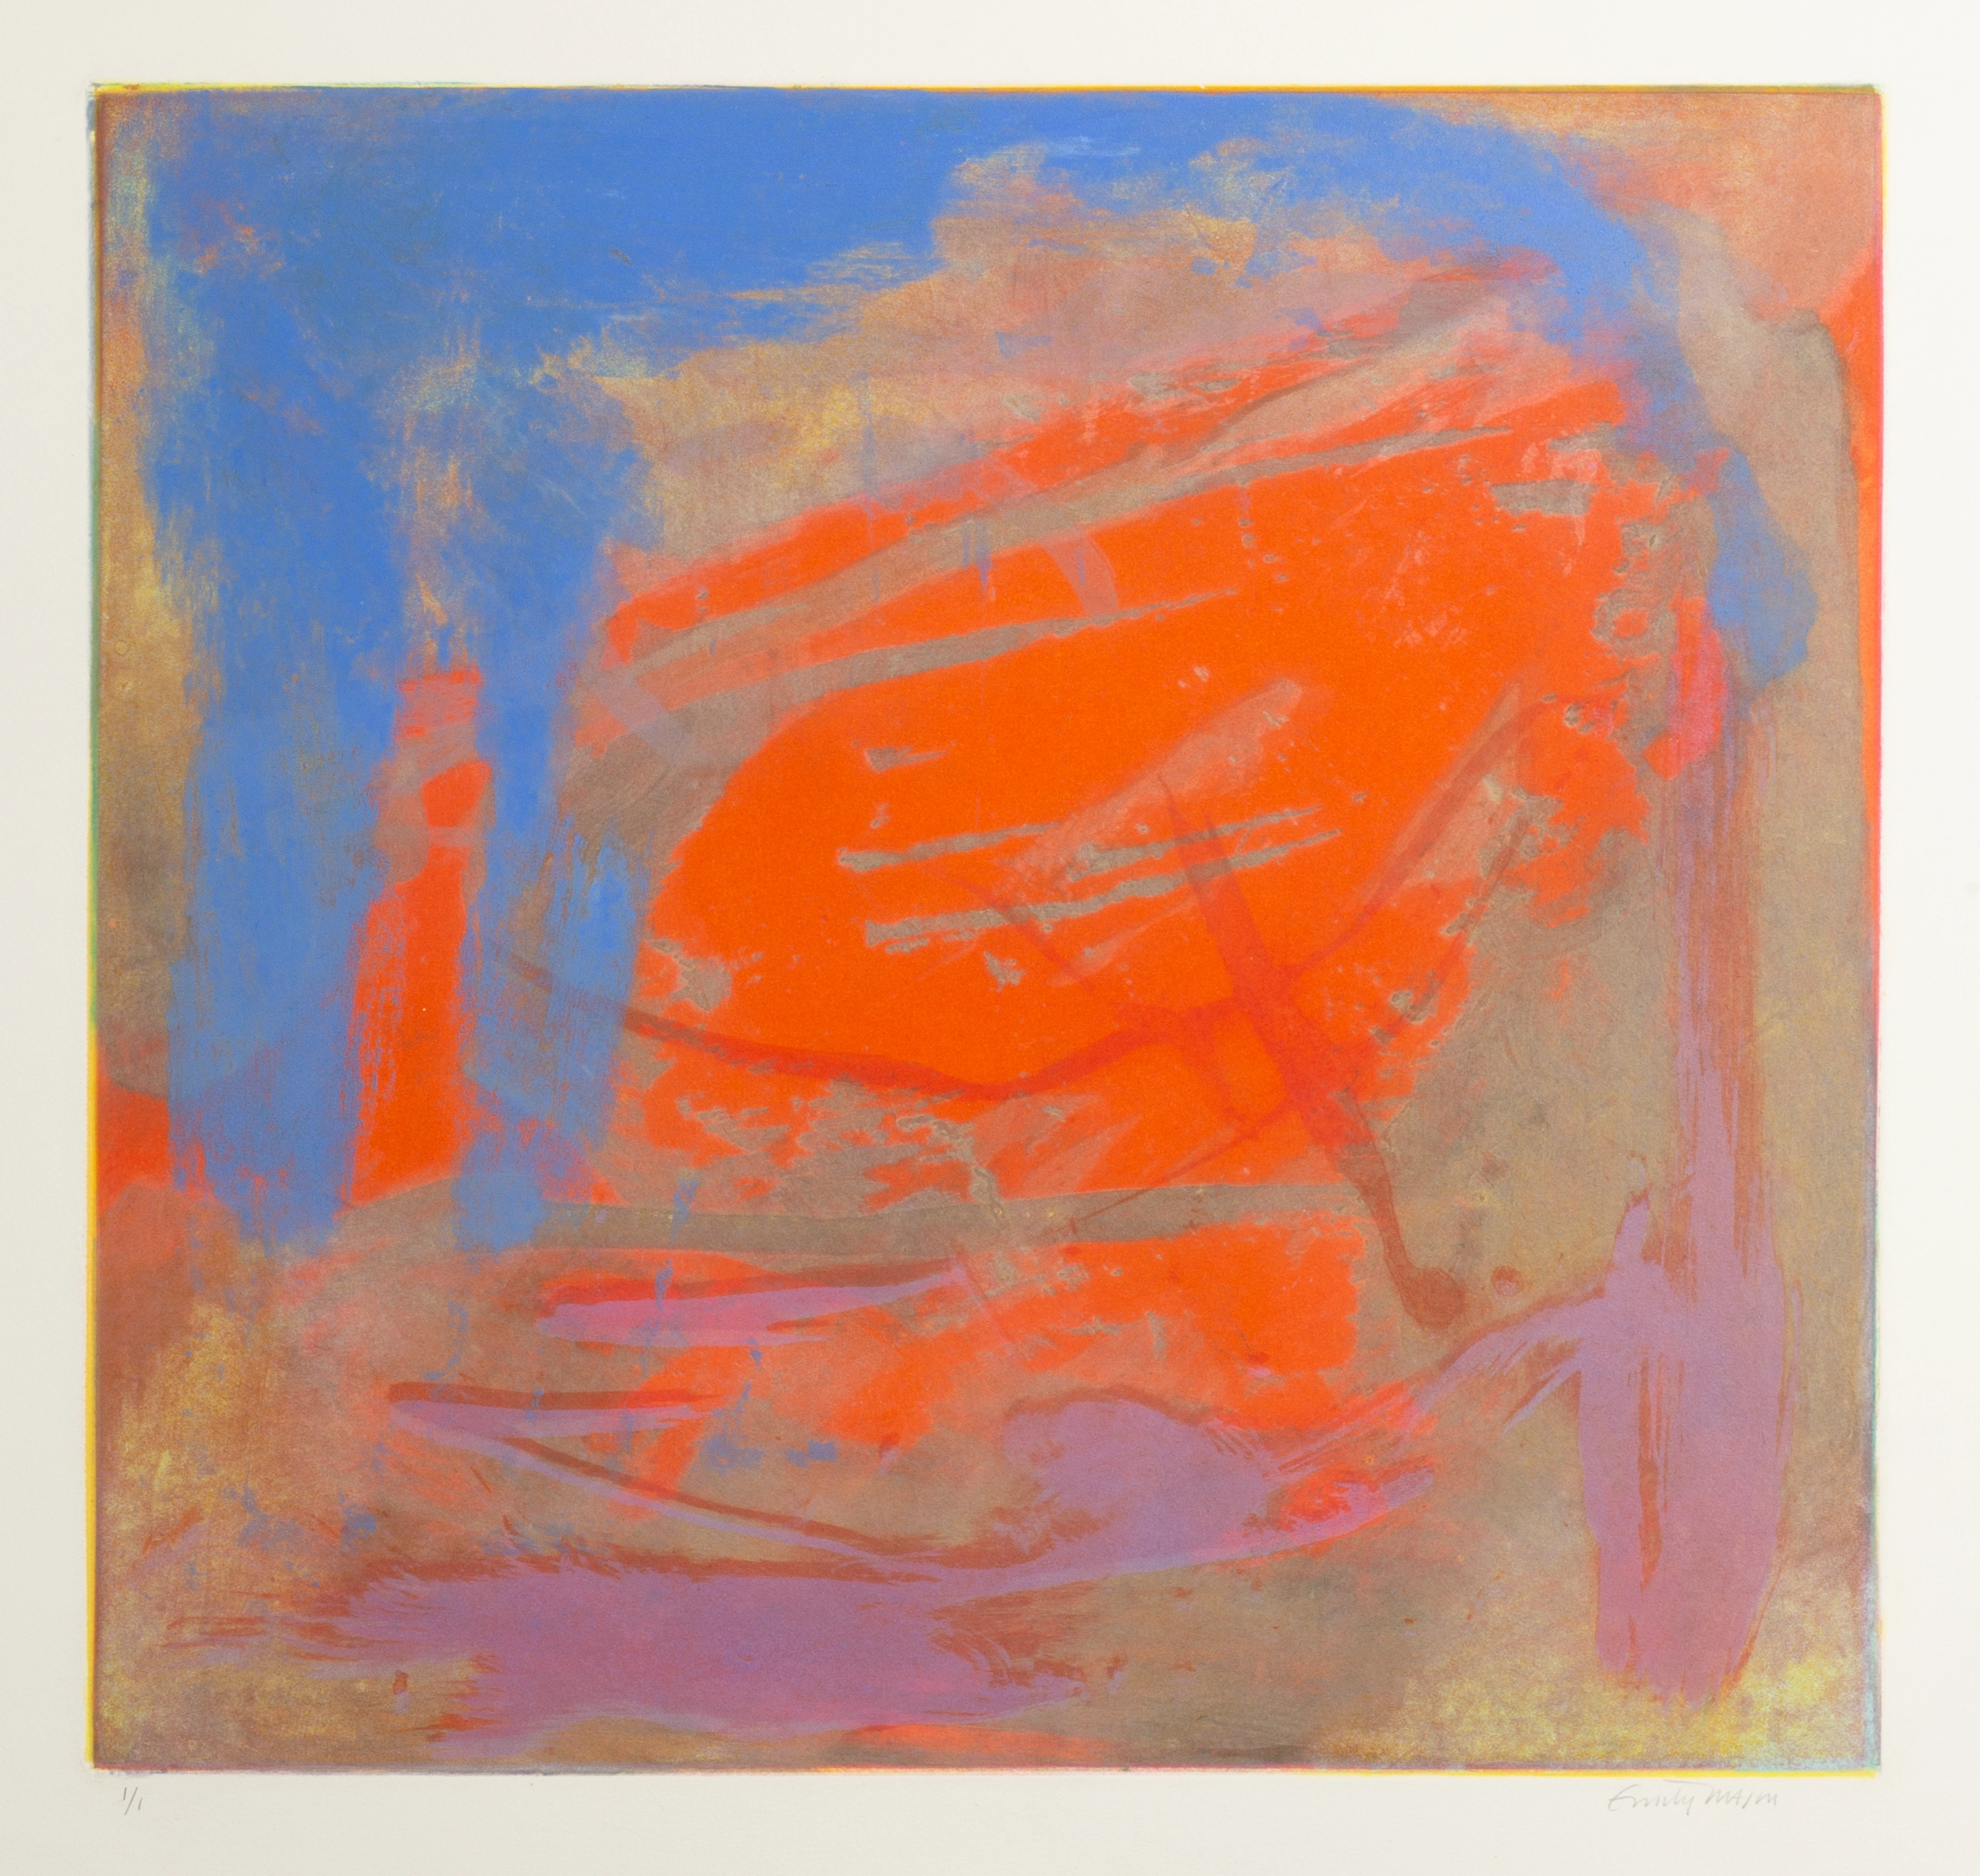 Image of an abstract print that features saturated orange and blue gestures over a neutral, taupe and mauve background.